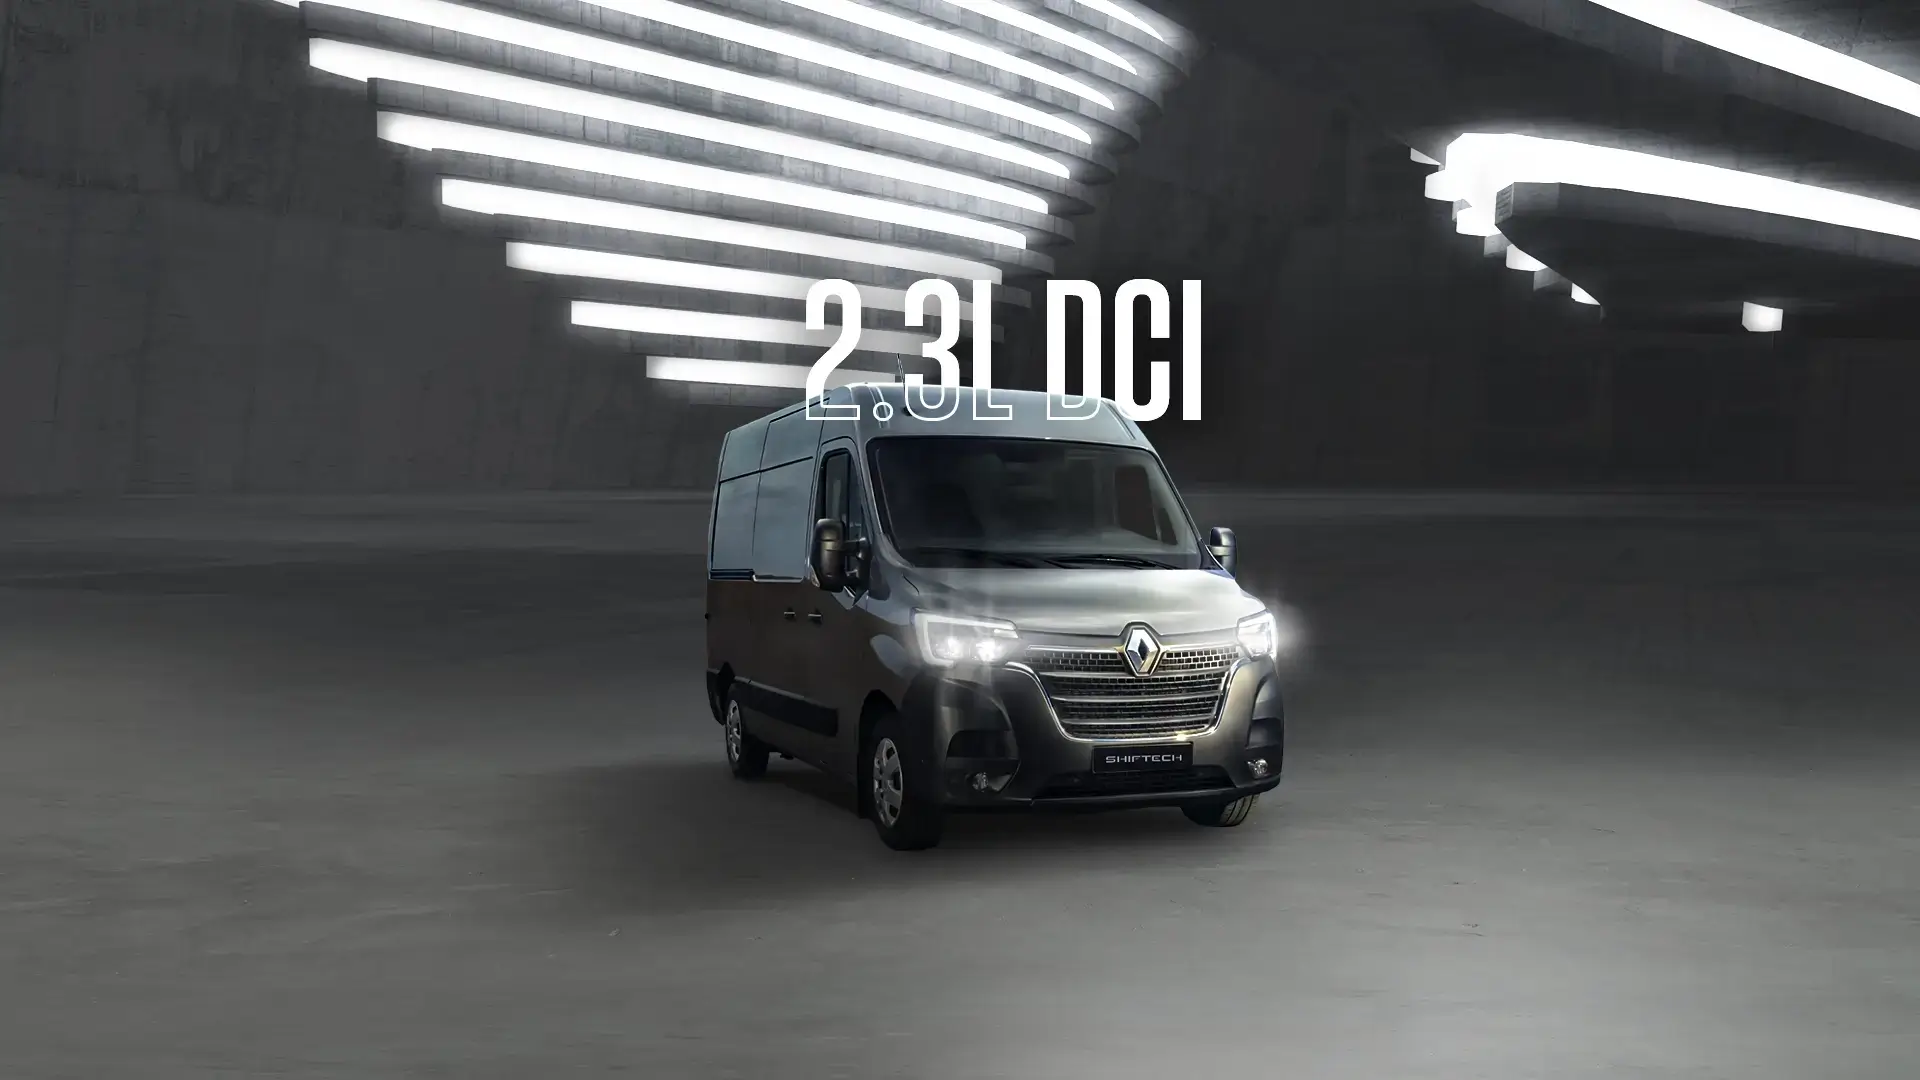 Shiftech campagne 13tce 1920x1080px mars24 renault master 2